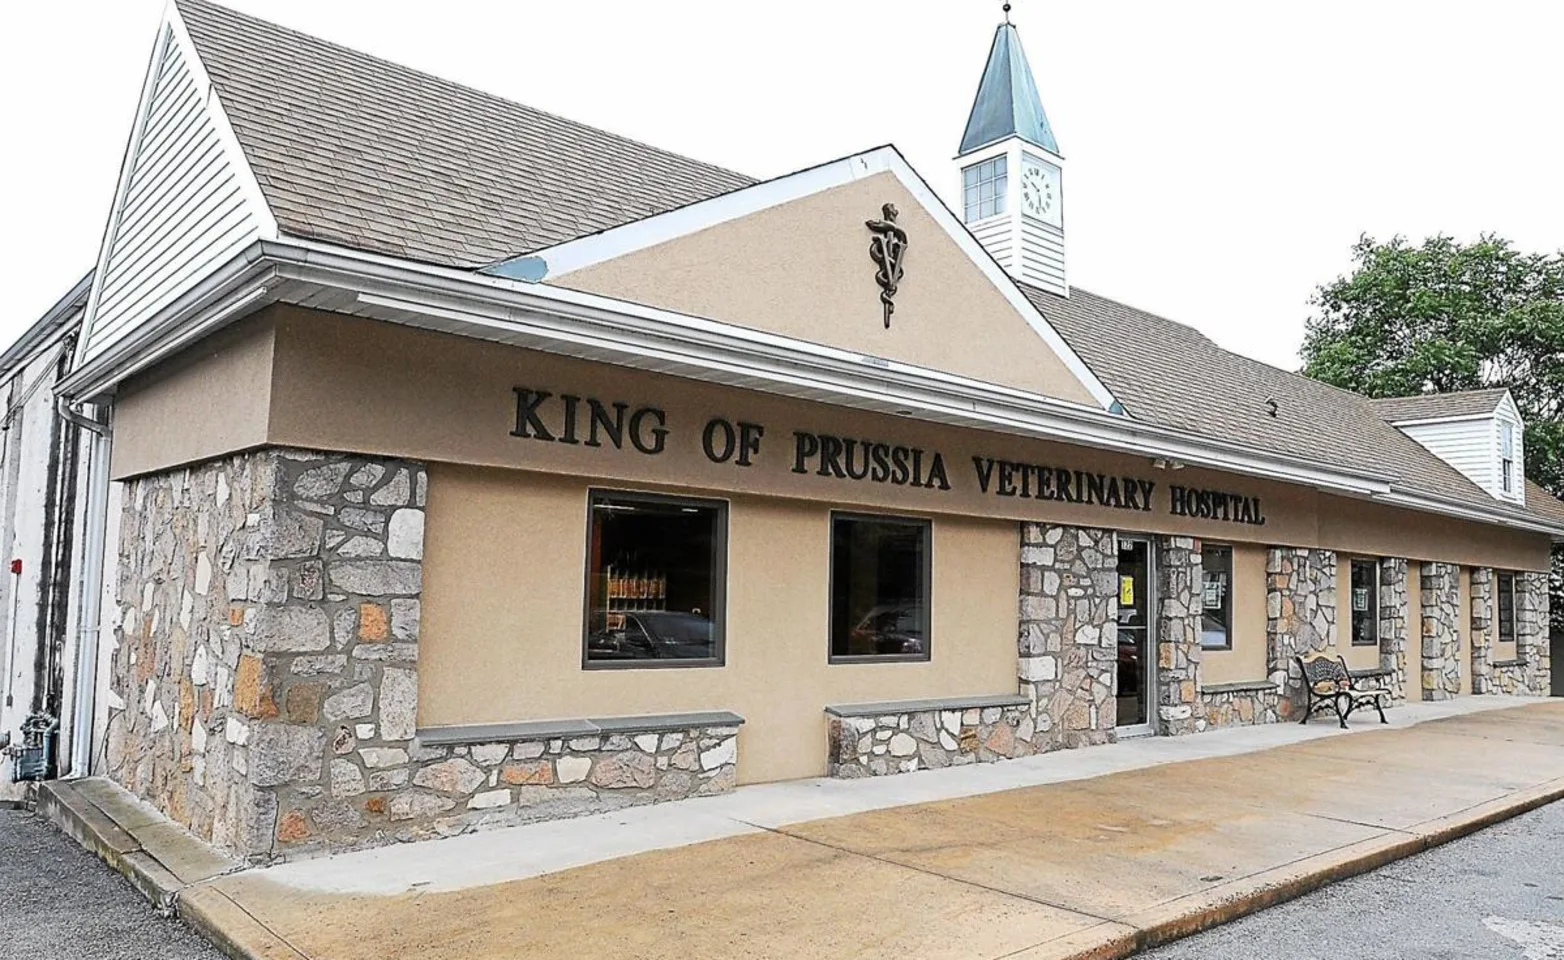 King of Prussia Veterinary Hospital exterior